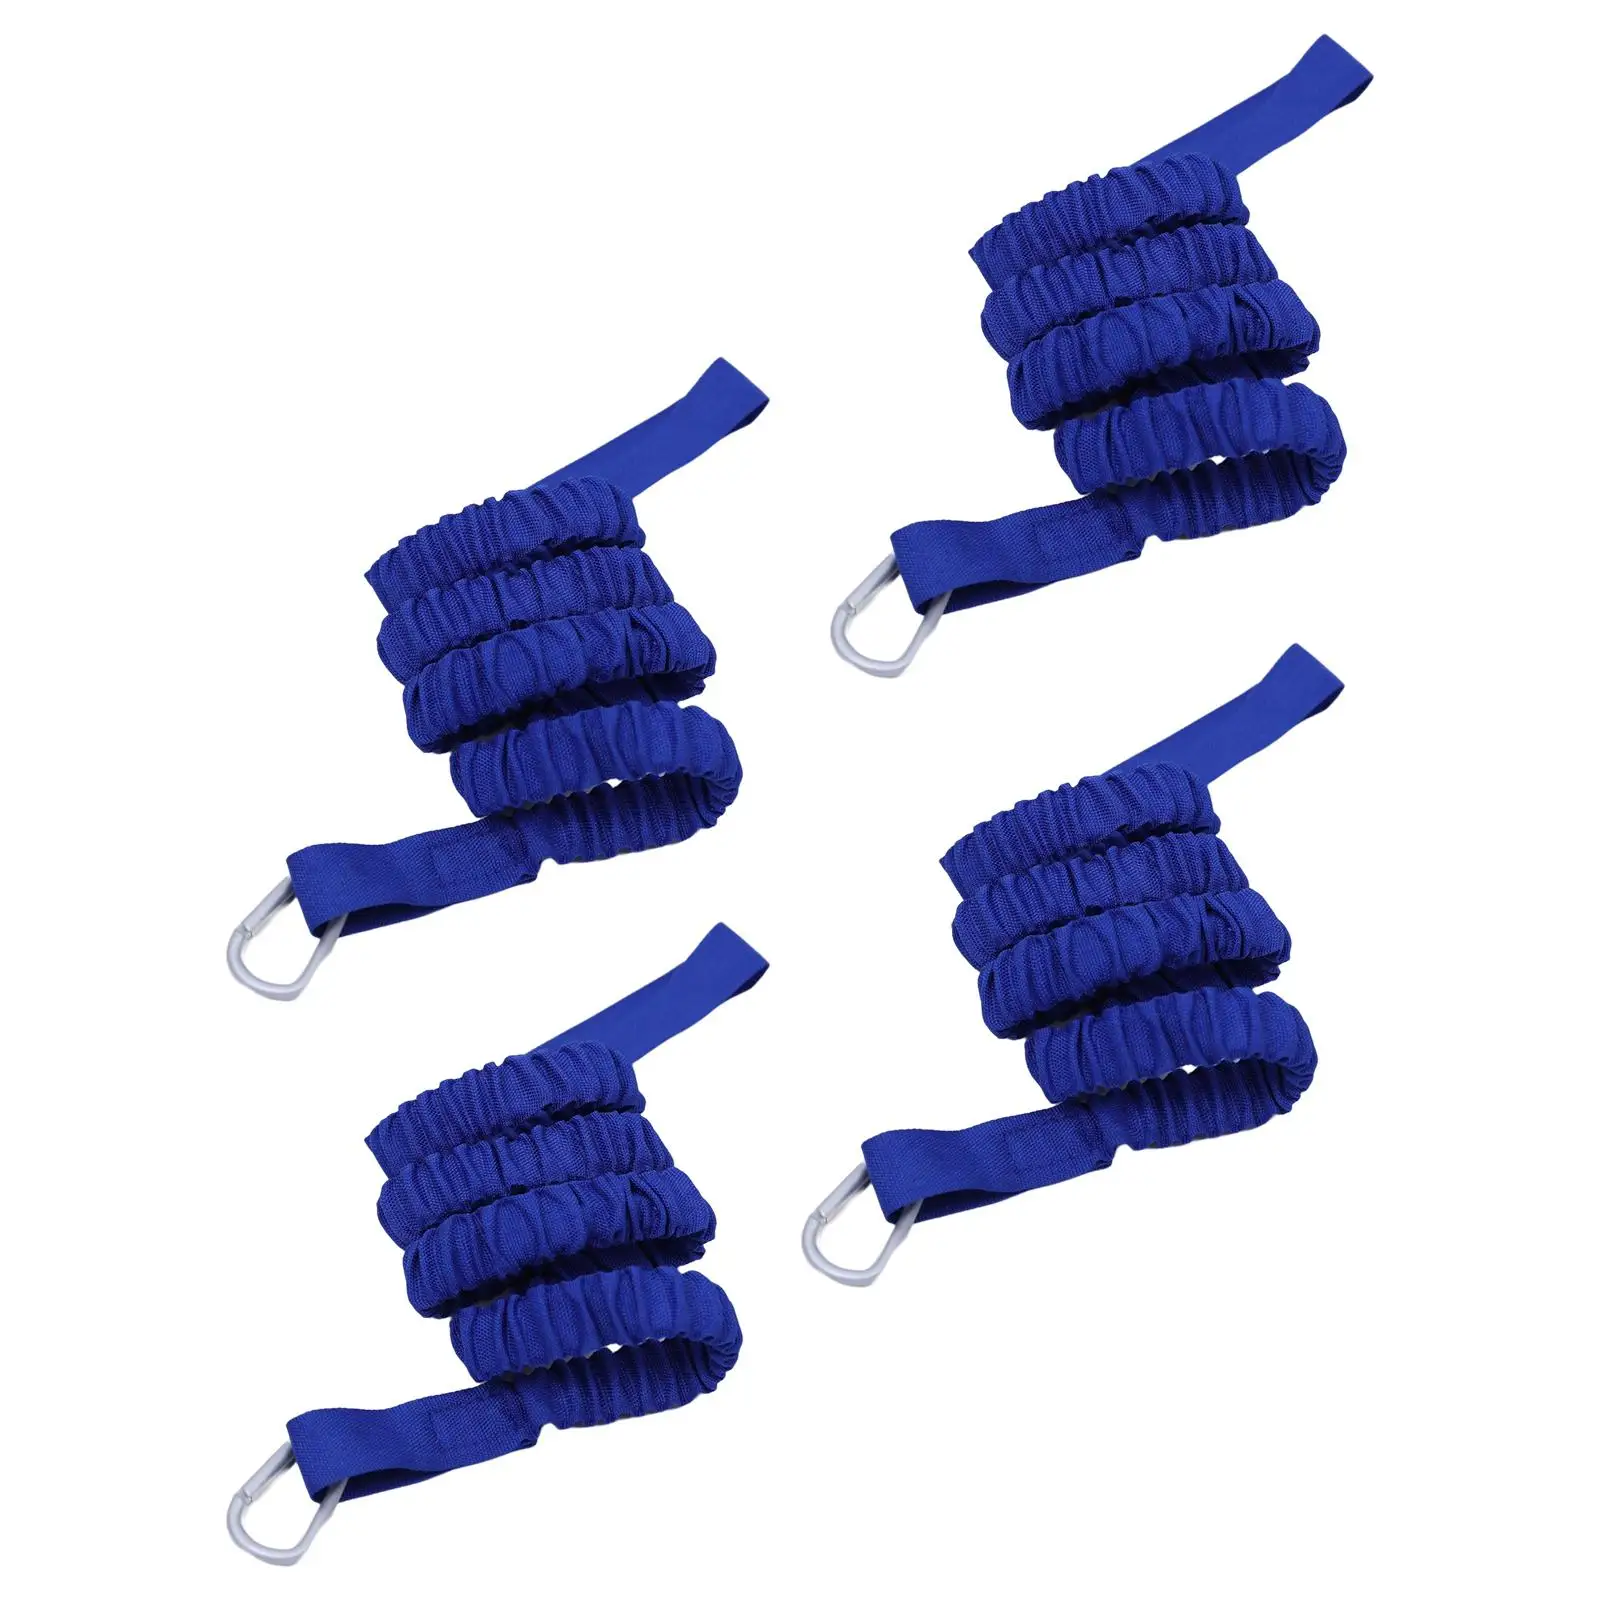 Kayak Paddle Lanyard Rod Leash Stretchable Coiled for Canoeing Rafting Retractable 61inch Practical Tool Wide Application